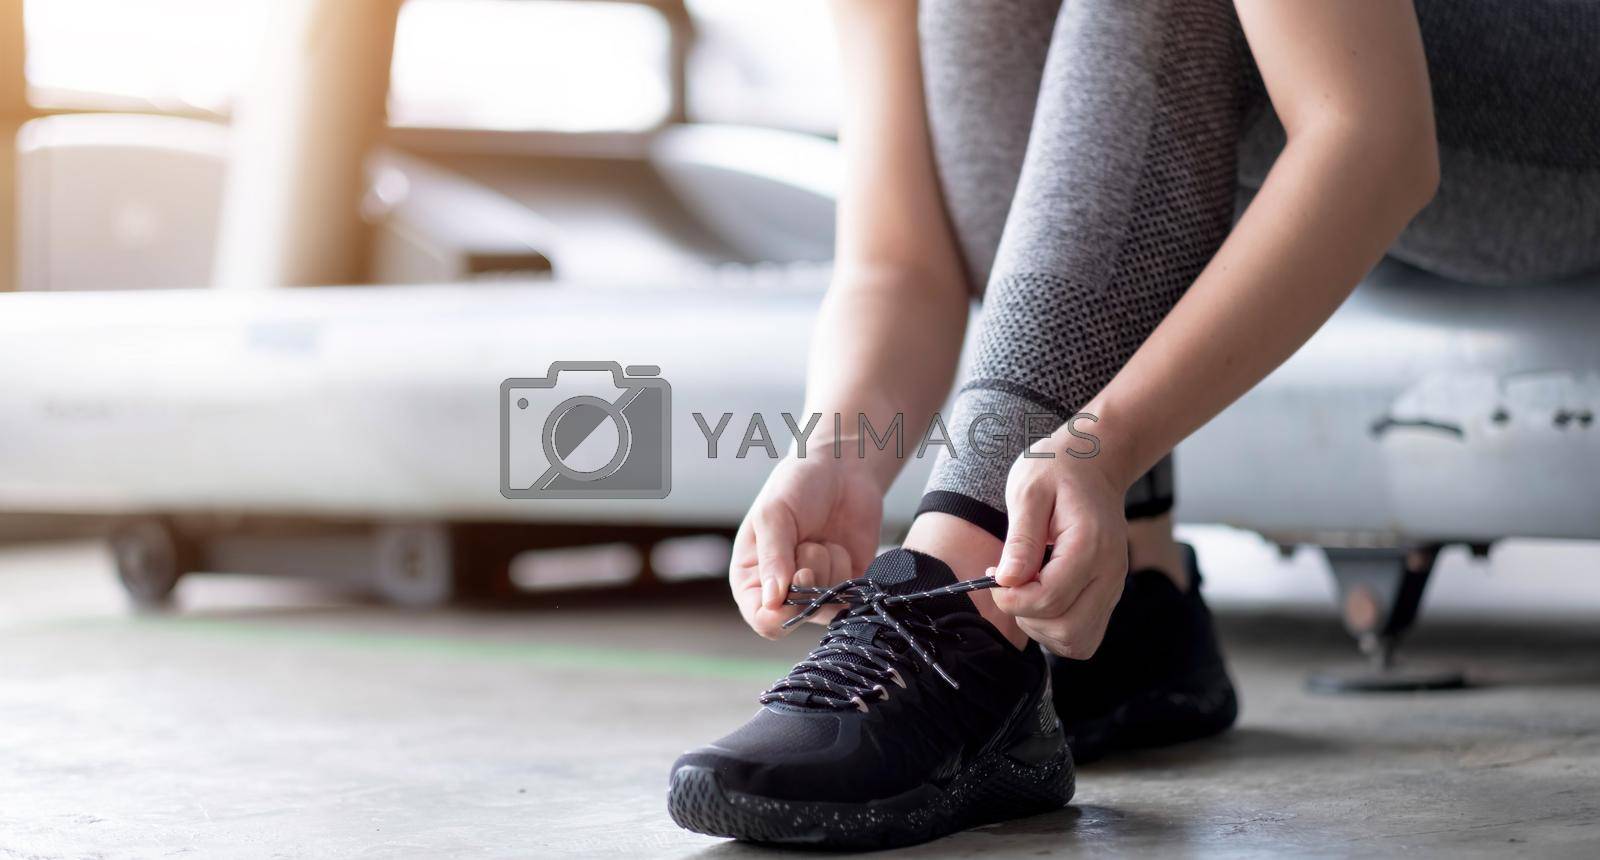 Sports Shoes. Woman Hands Tying Shoelaces On Fashion Sneakers.